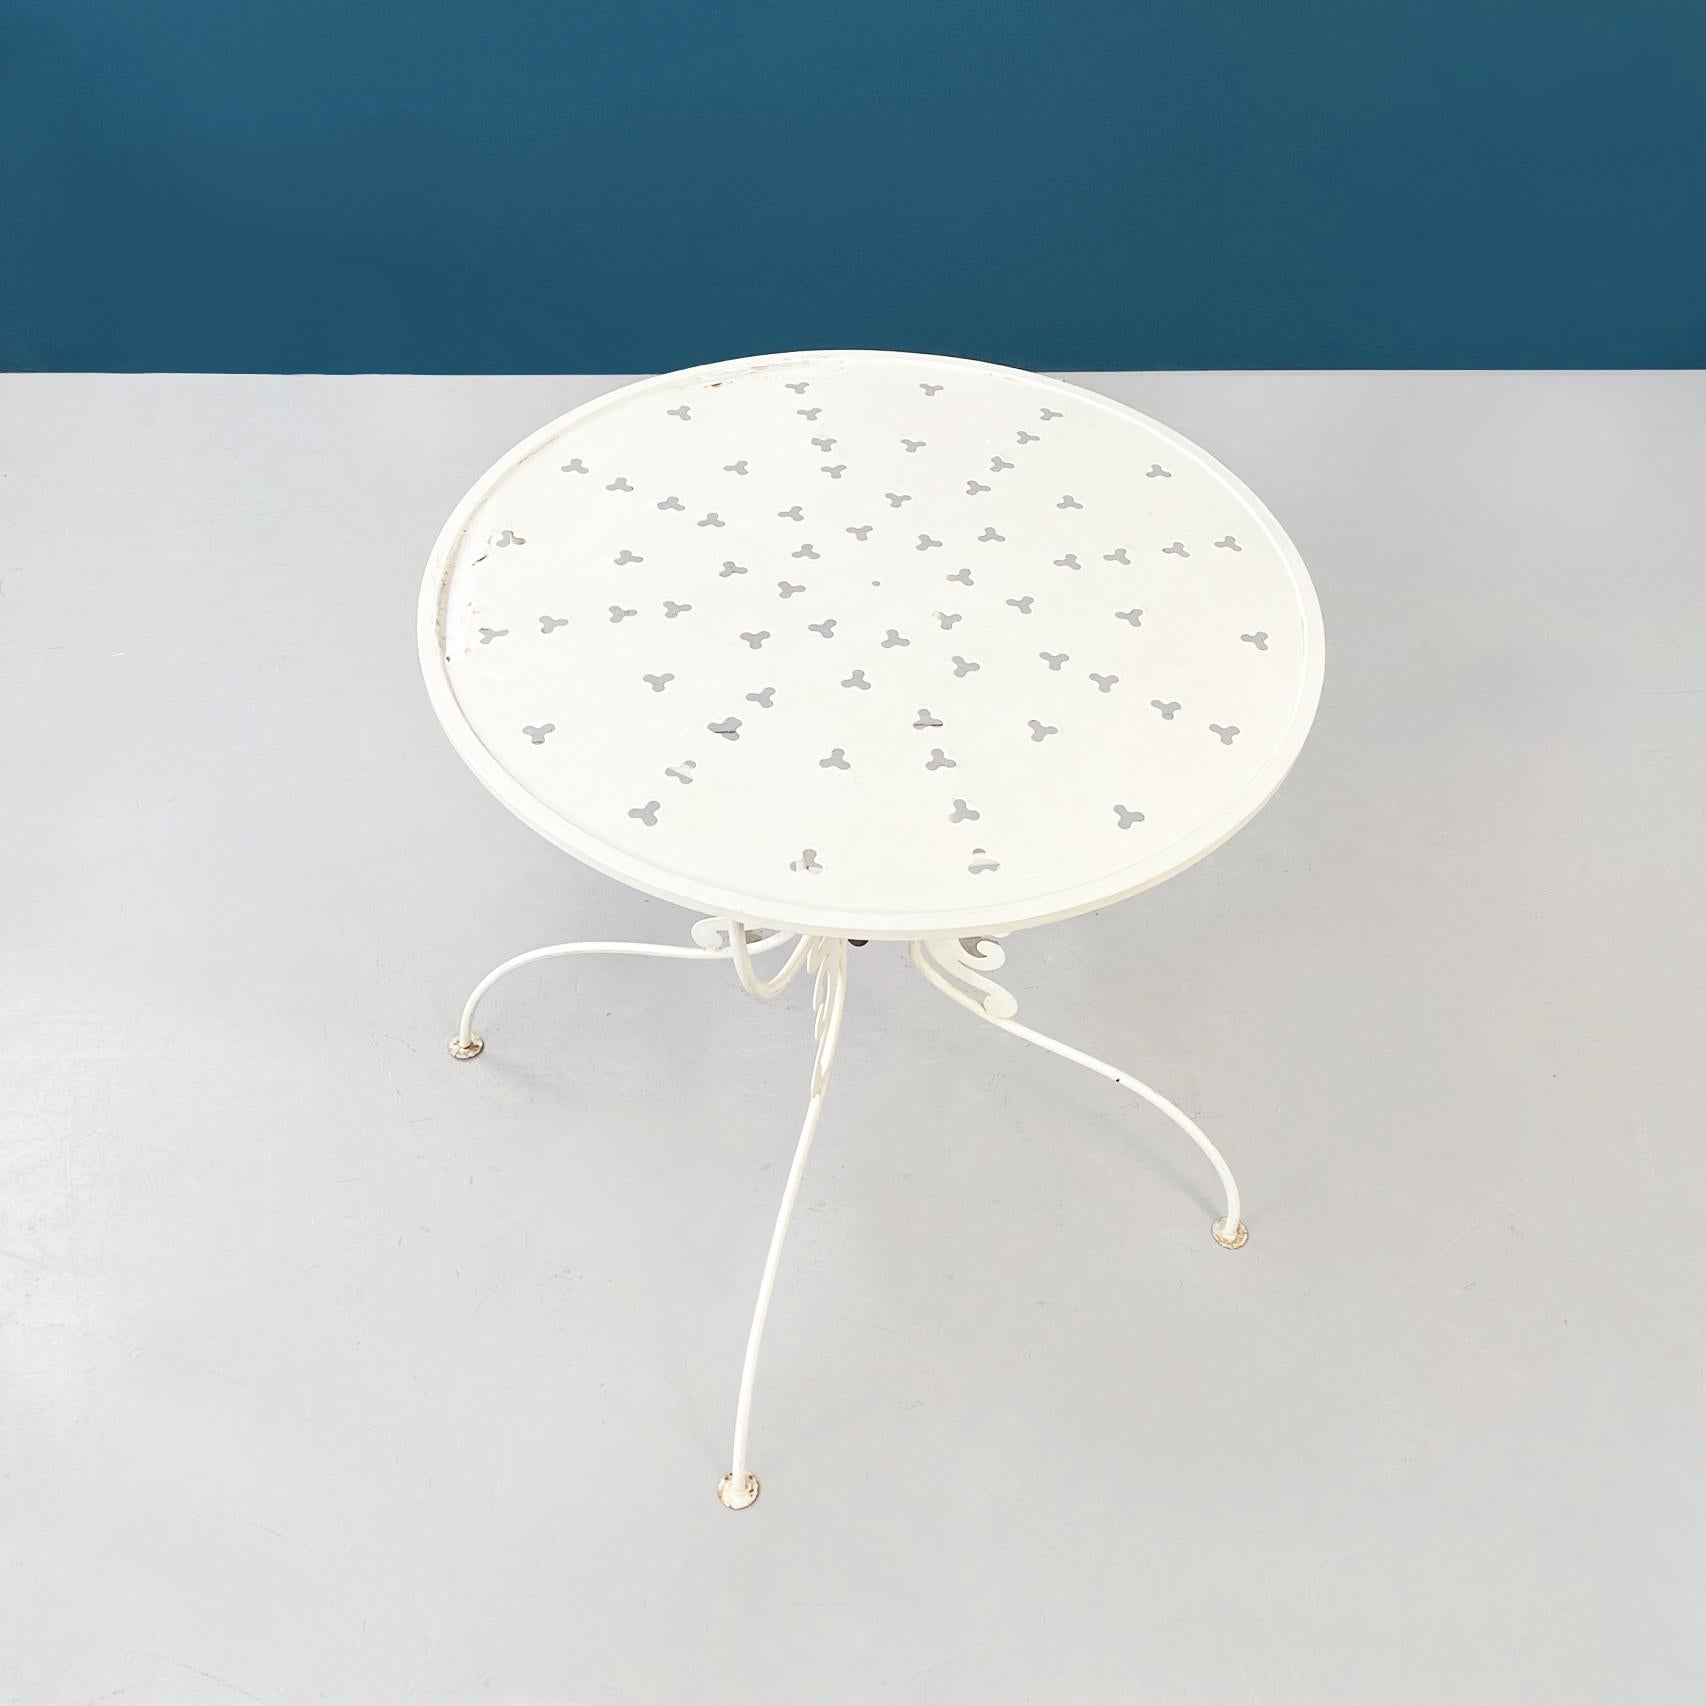 Mid-Century Modern Italian Mid-Century Garden Table in White Wrought Iron Finely Worked, 1960s For Sale